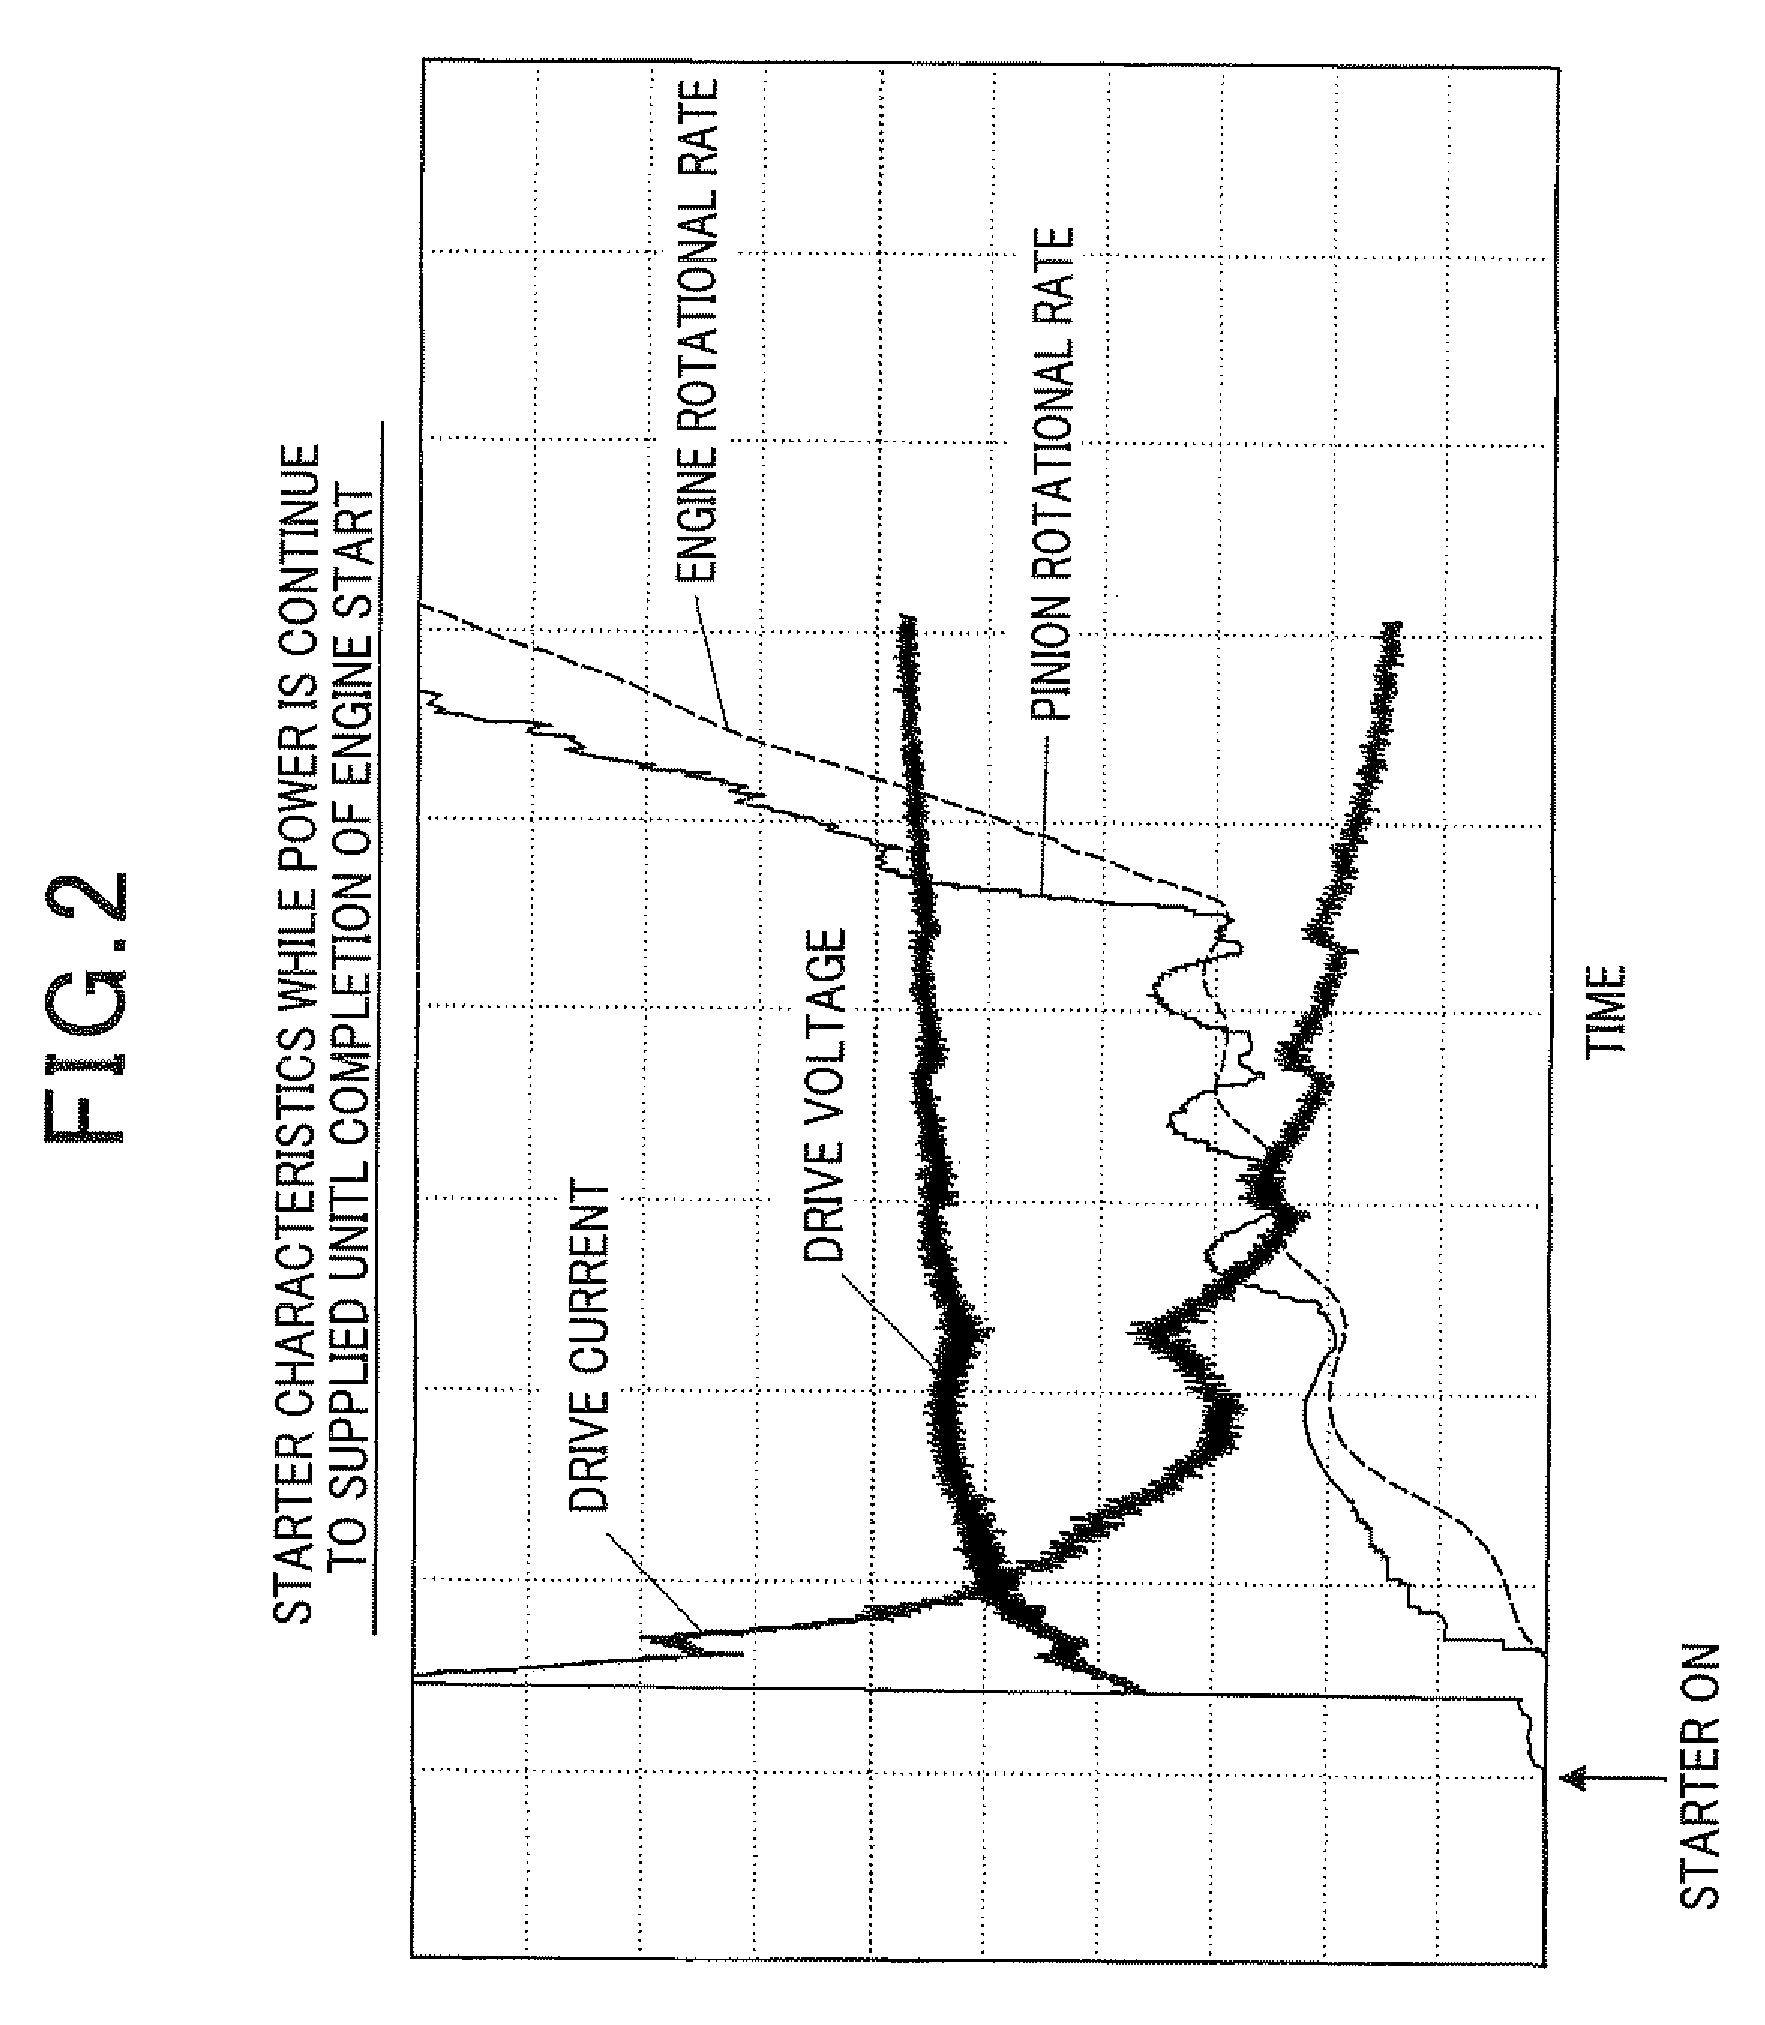 Control apparatus for controlling on-vehicle starter for starting engine